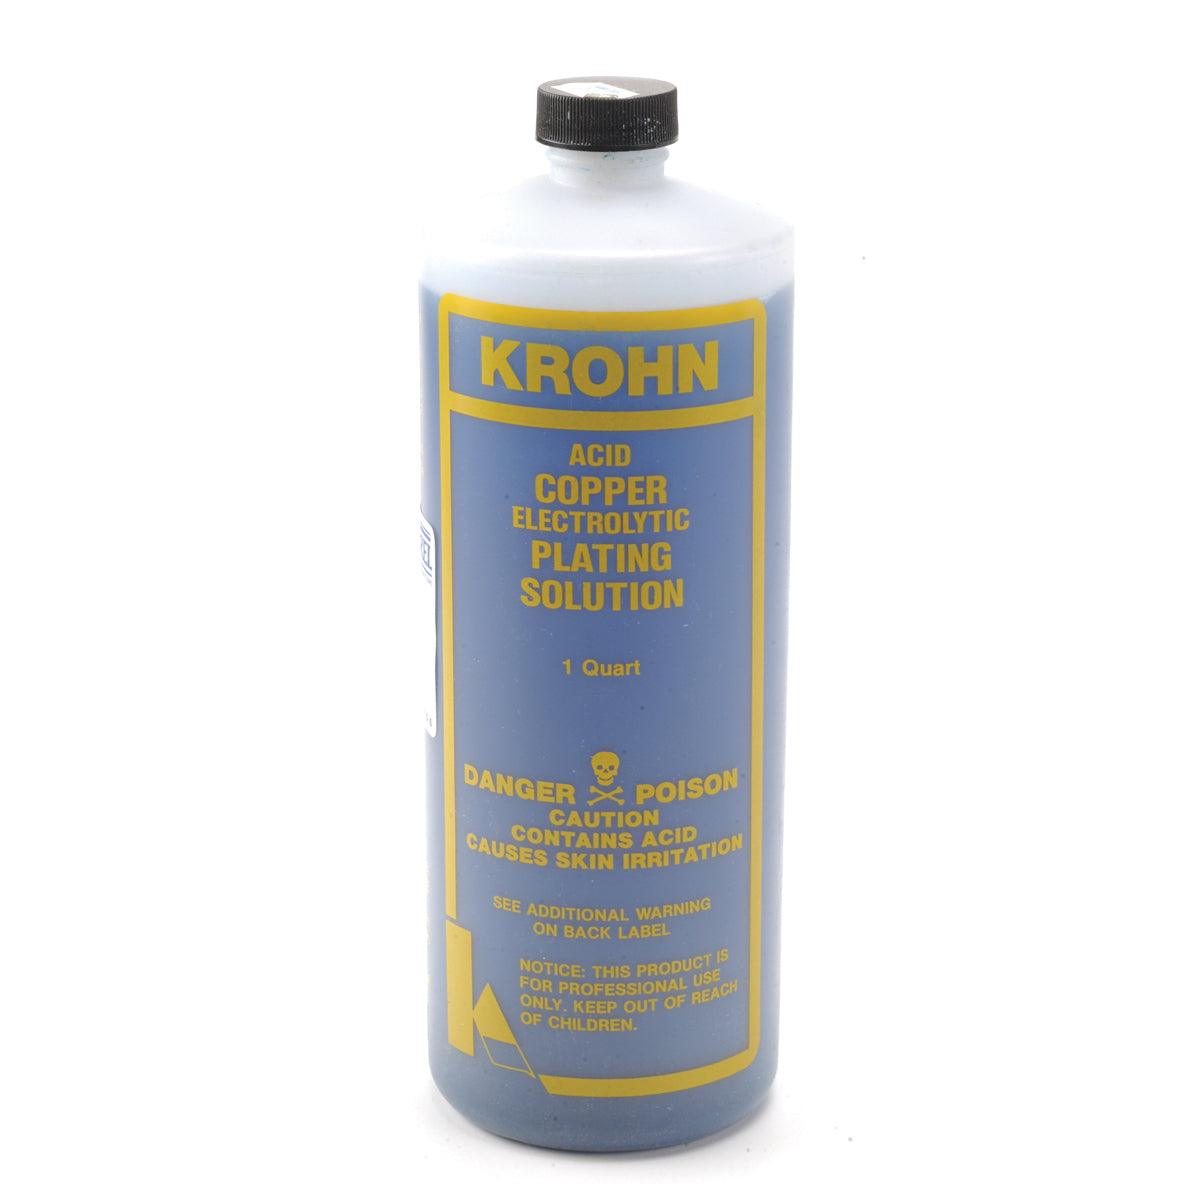 Krohn Stainless Anode & Heavy Duty Electro Cleaner Solution